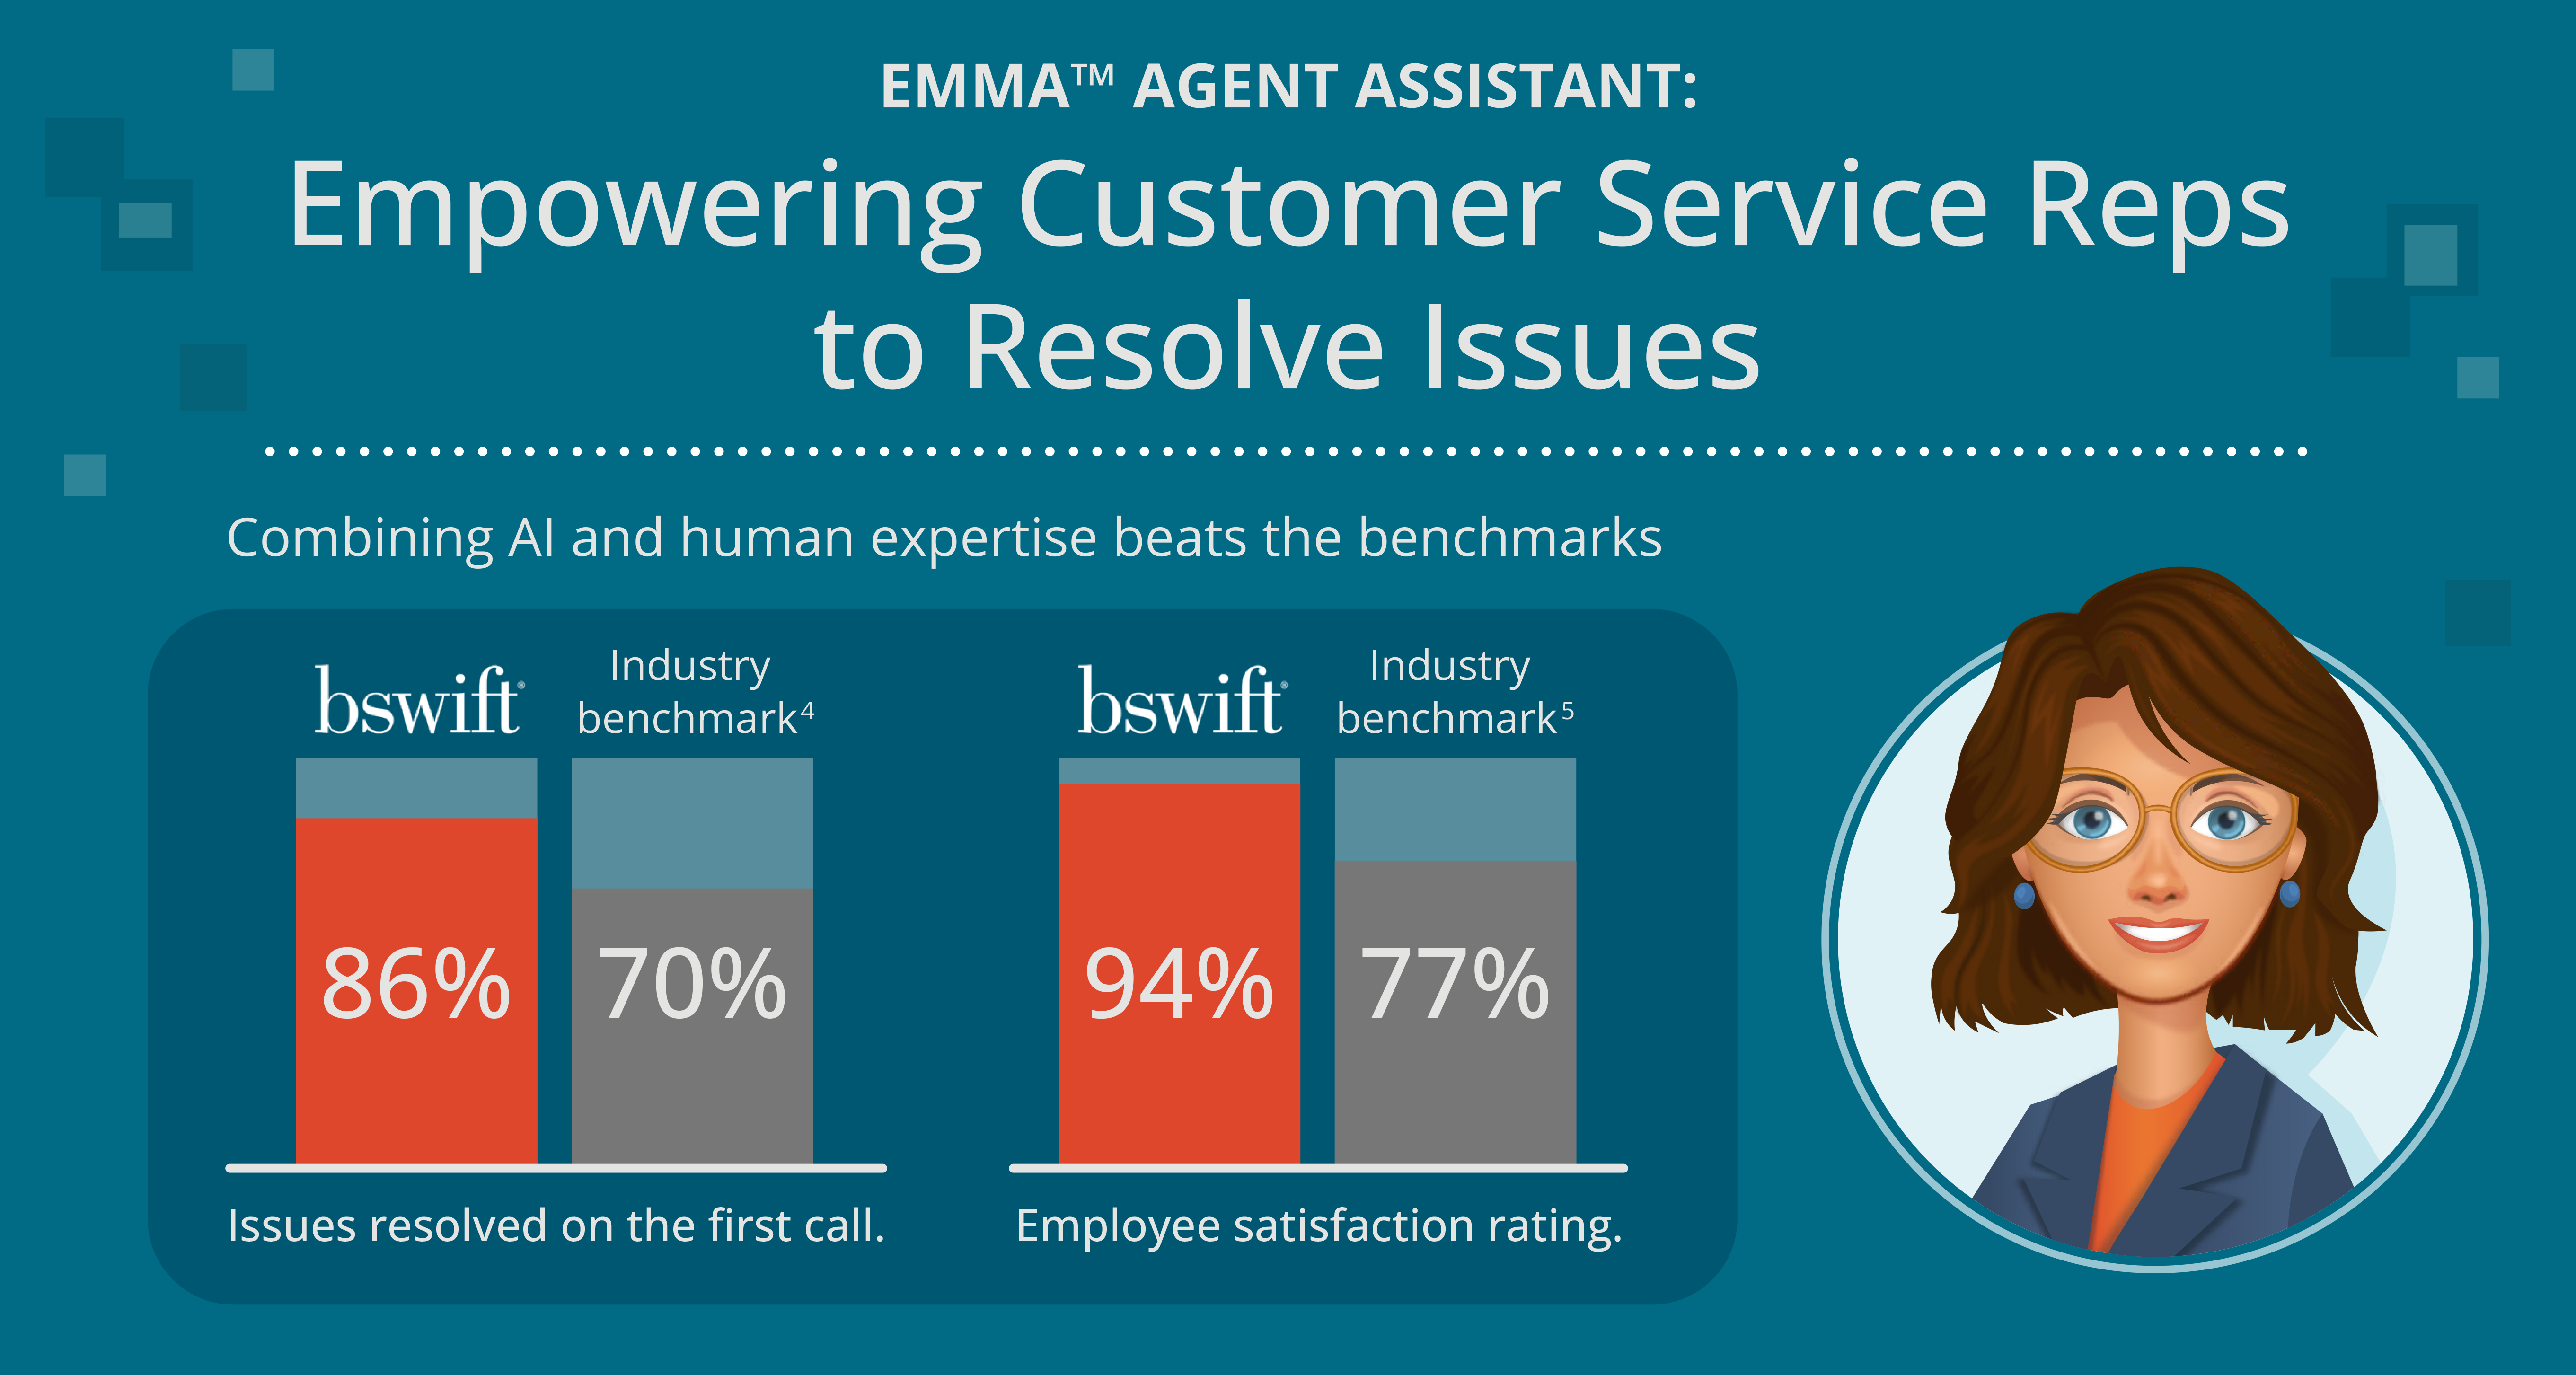 Emma™ Co-Pilot: Empowering Customer Service Reps to Resolve Issues Combining AI and human expertise beats the benchmarks Visual: Bar graph, two bars, labeled “Issues resolved on the first call.” 86% (bswift) 70% (industry benchmark) Visual: Bar graph, two bars, labeled “Employee satisfaction rating.” 94% (bswift) 77% (industry benchmark)6 